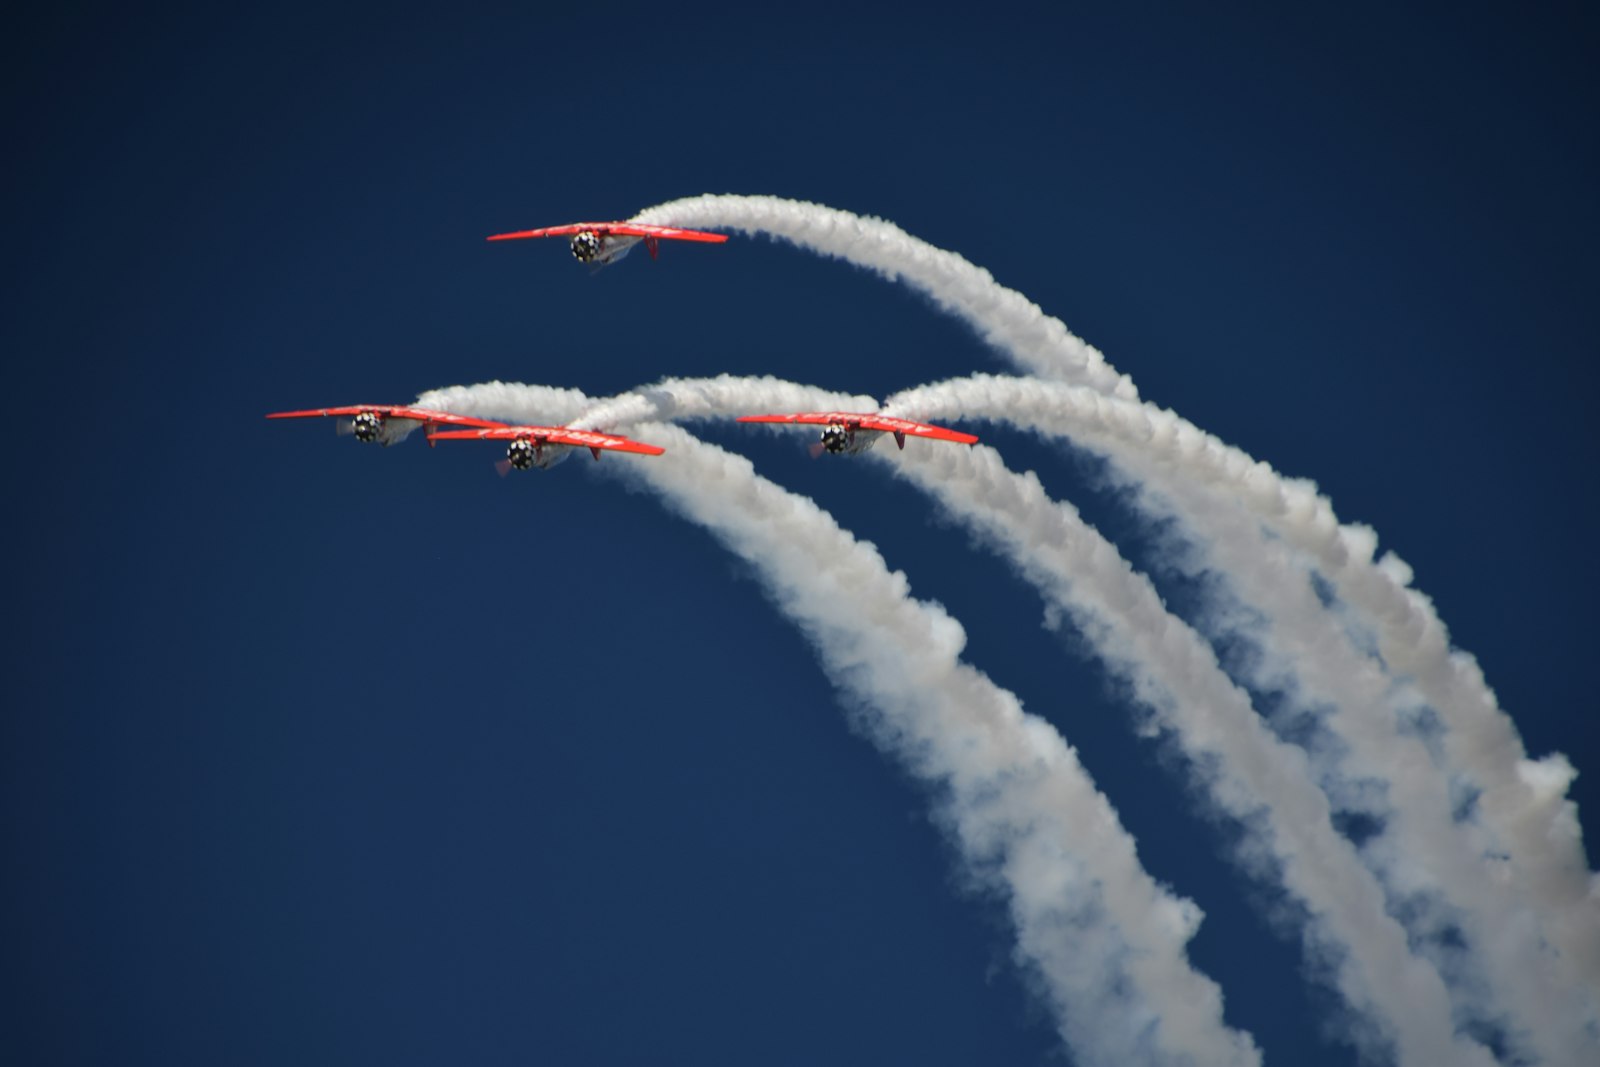 Nikon D5300 + Tamron 16-300mm F3.5-6.3 Di II VC PZD Macro sample photo. Four red planes with photography